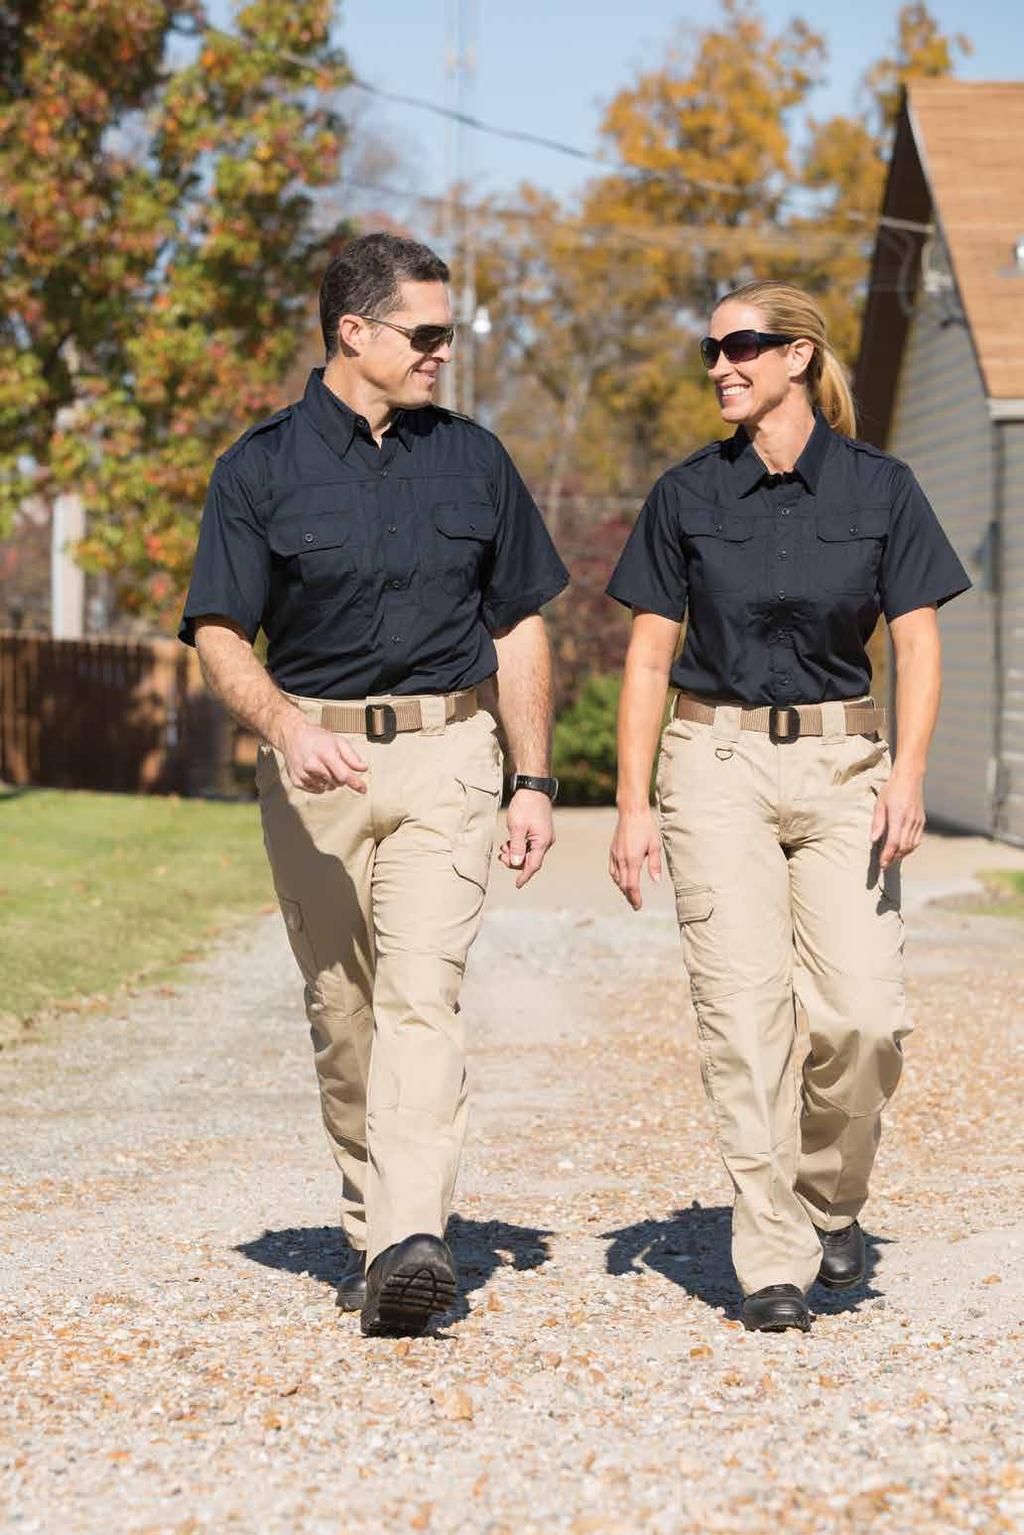 PANTS TACTICAL PANT Canvas and lightweight Tactical Pant F5252-82 Men s canvas MSRP $49.99 F5252-50 Men s lightweight MSRP $49.99 F5254-82 Women s canvas MSRP $49.